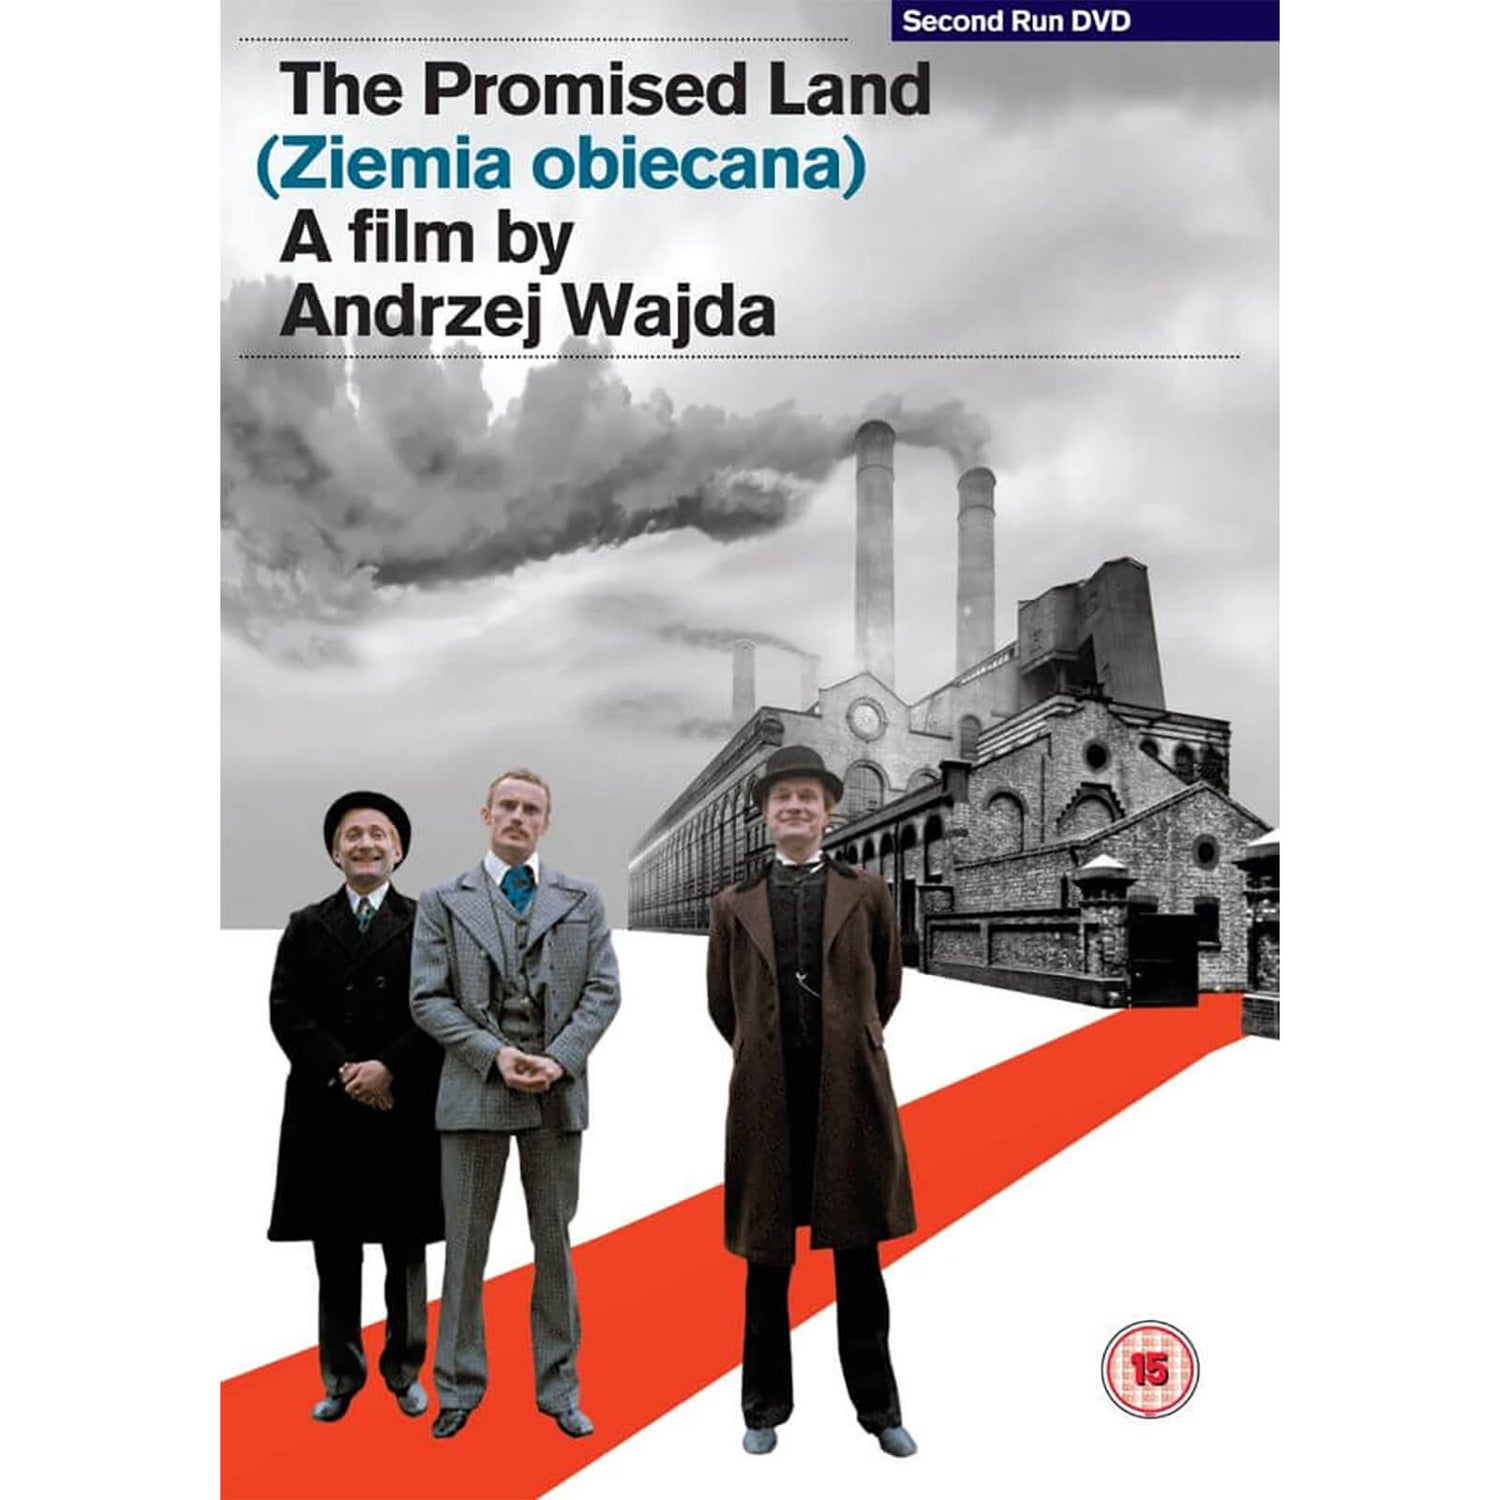 The Promised Land DVD